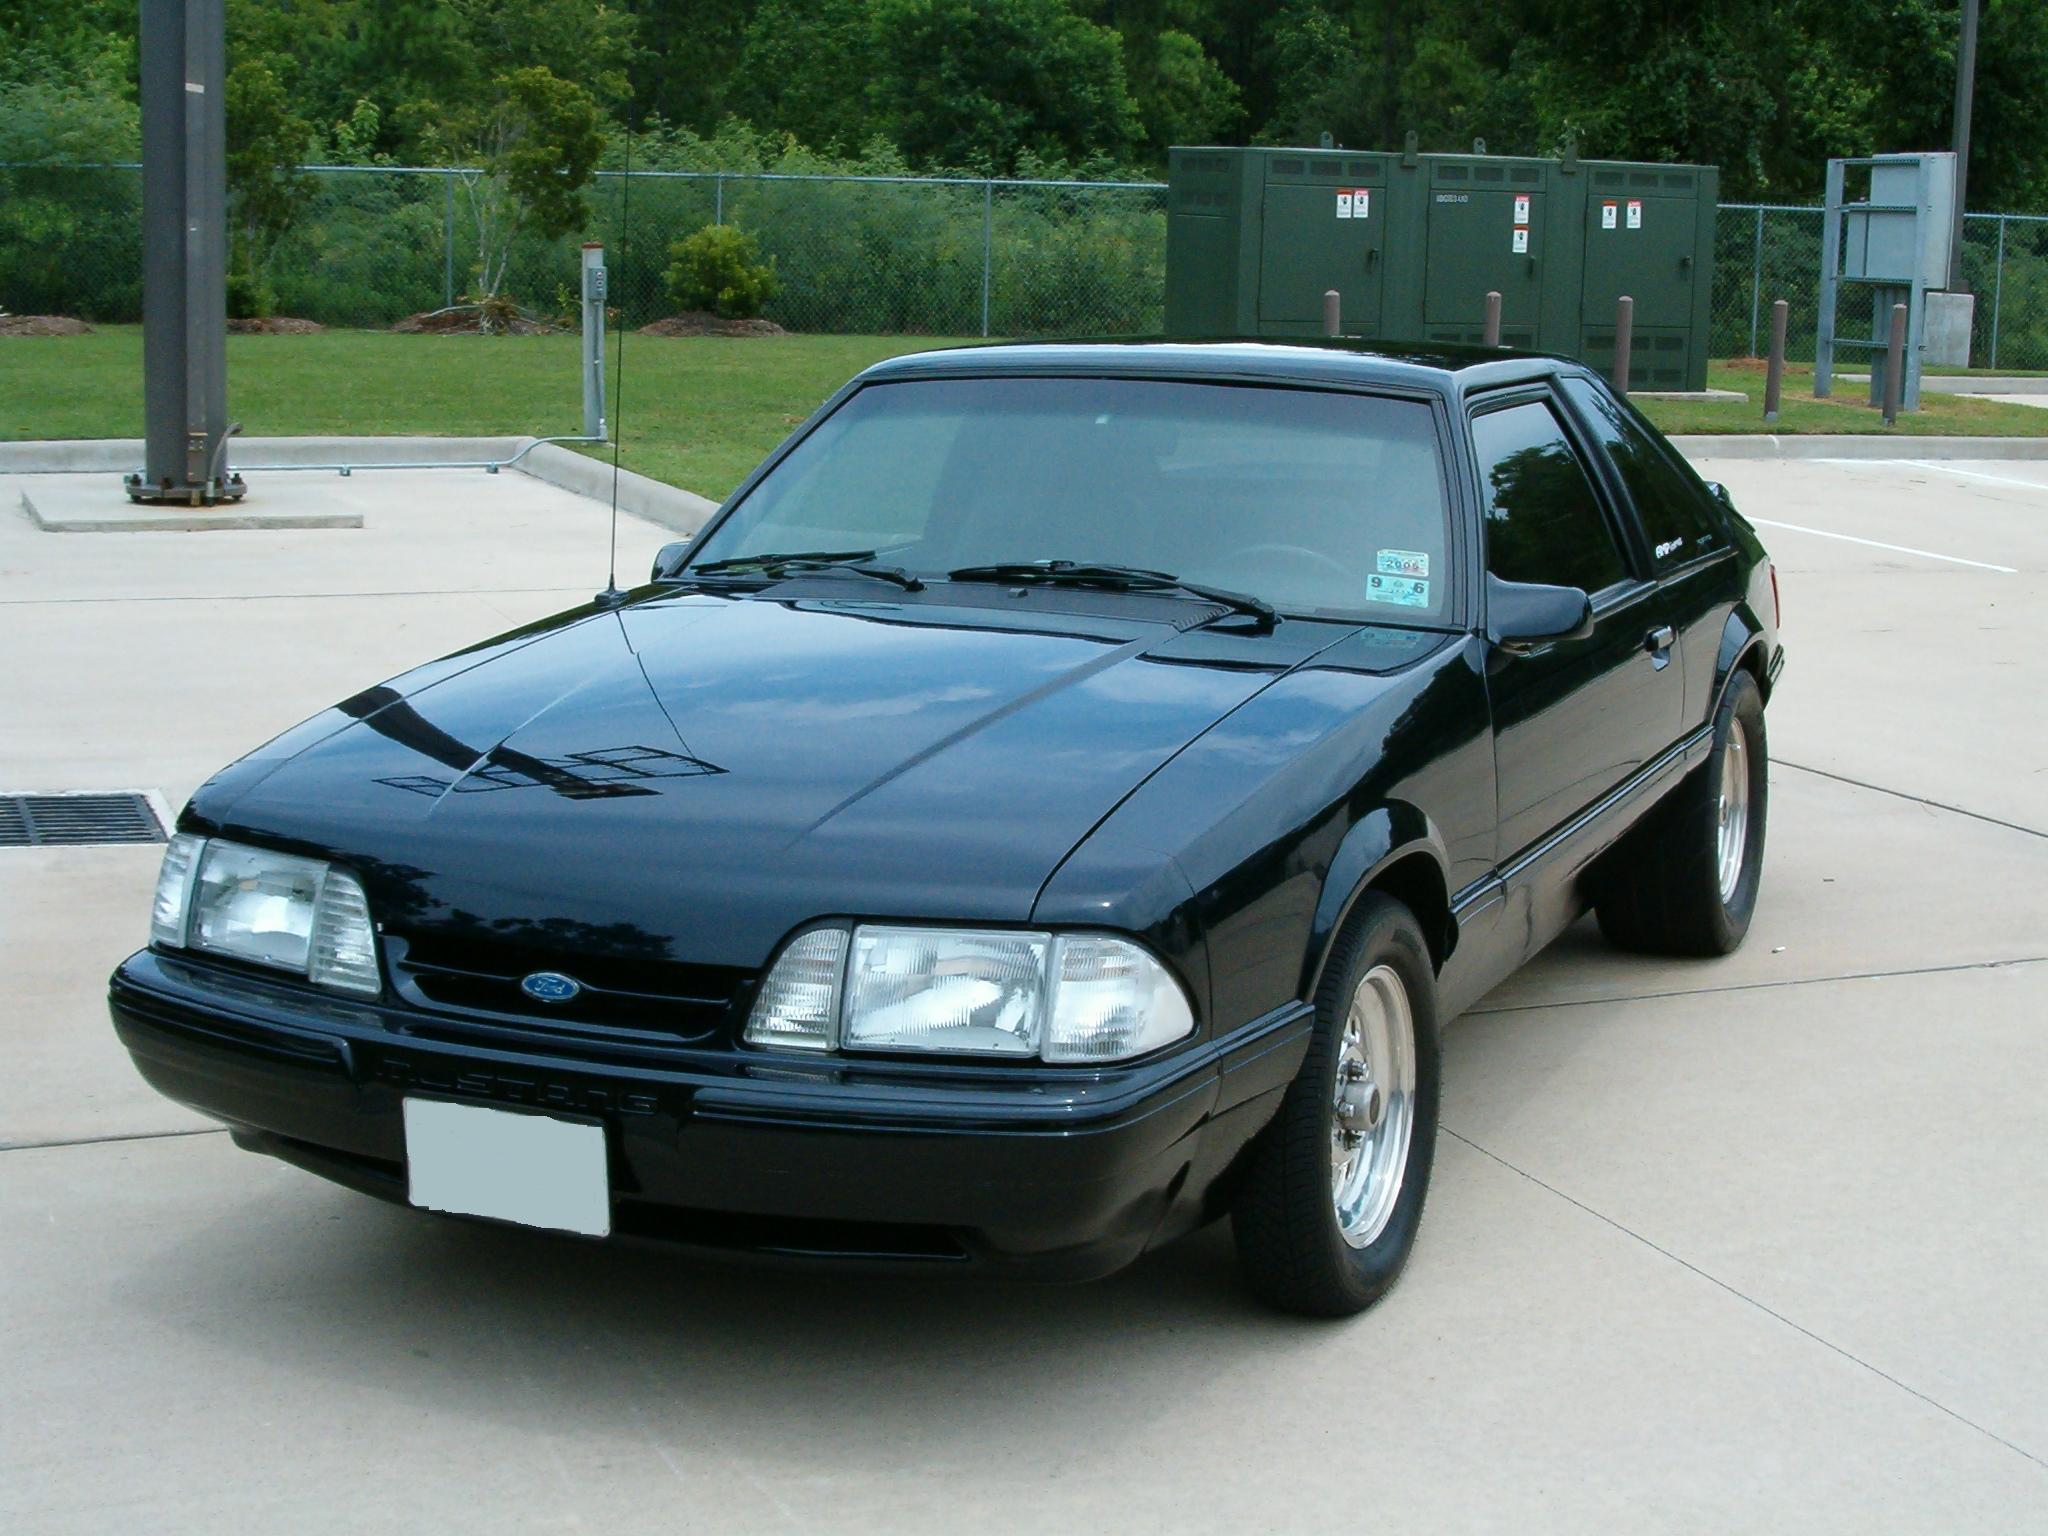 1989 Mustang Coupe